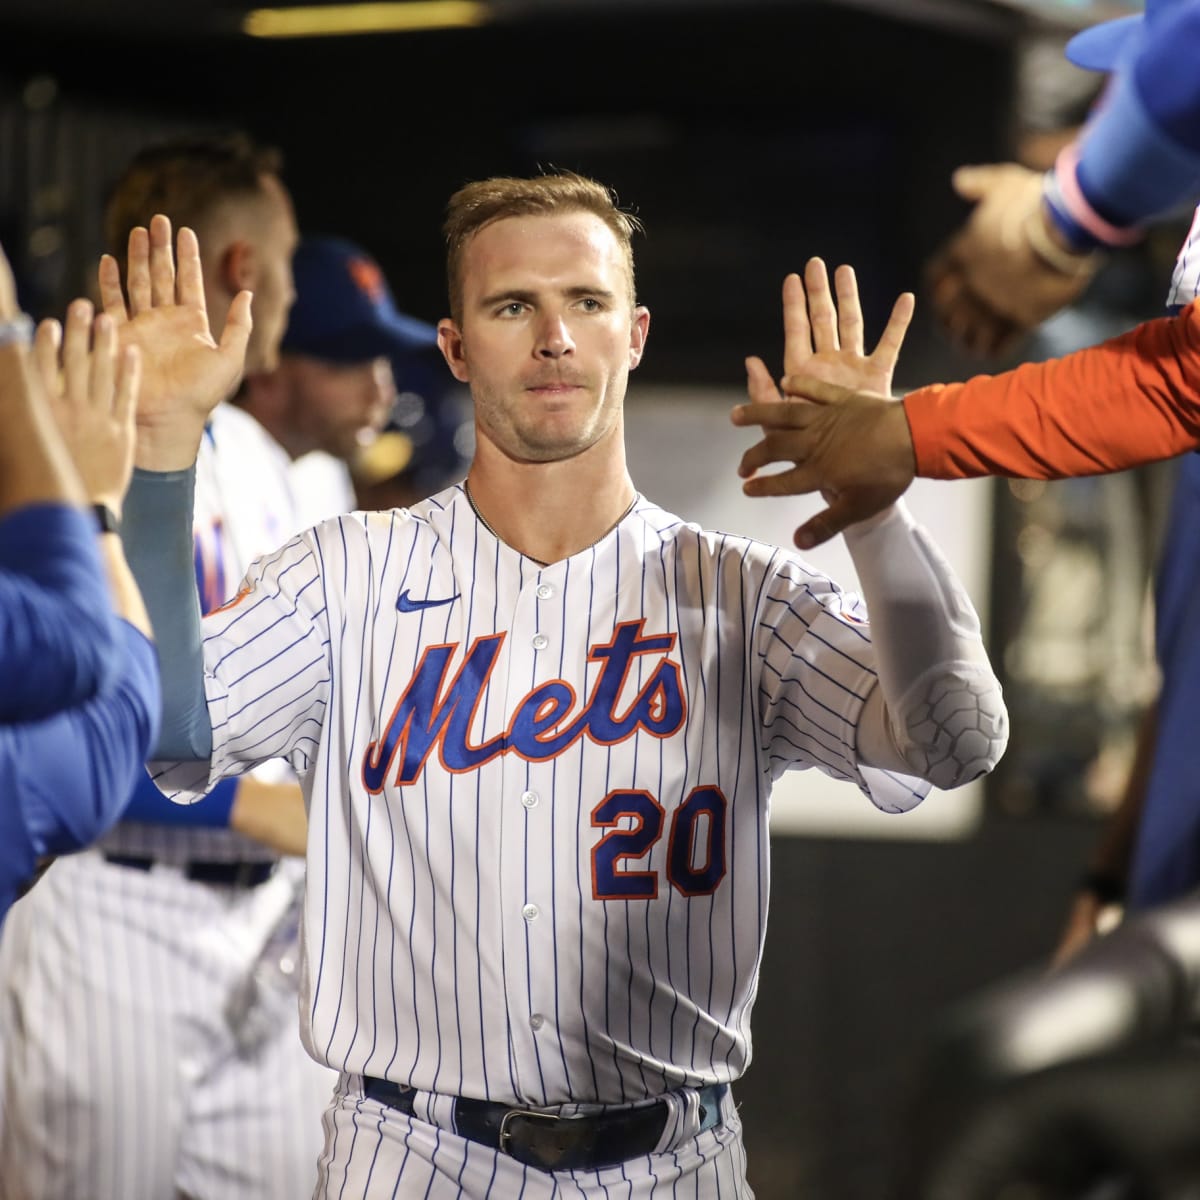 New York Mets 1B Pete Alonso is the happiest man in MLB - Sports Illustrated